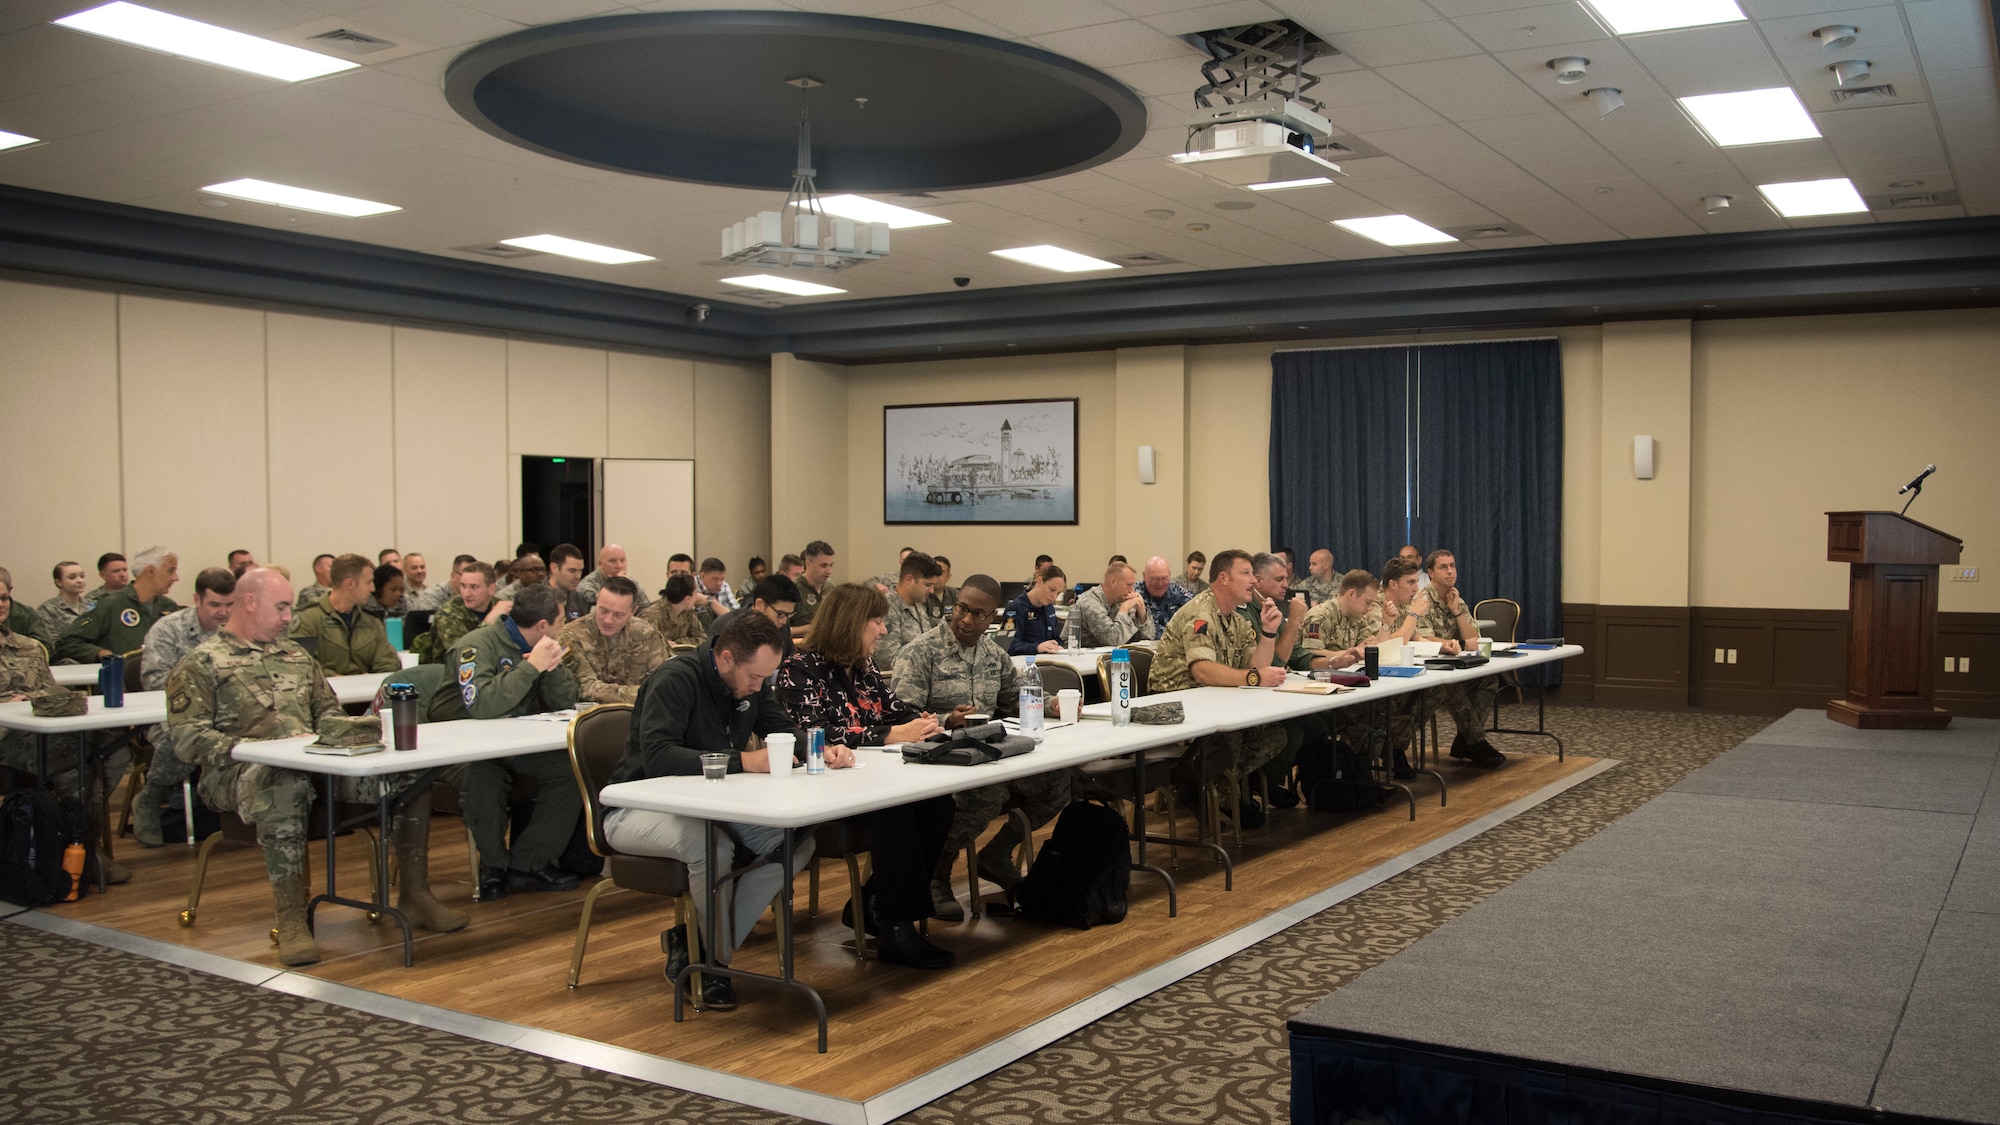 Air Mobility Command and Team Fairchild host representatives from several partner nations at the Mobility Guardian 2019 International Planning Conference held at Fairchild Air Force Base, Washington, Sept. 18, 2018. Mobility Guardian is the premiere AMC exercise designed to put U.S. and allied forces through the most realistic scenarios possible to prepare them to work together in situations ranging from humanitarian assistance to operating in contested environments. (U.S. Air Force photo/Senior Airman Ryan Lackey)